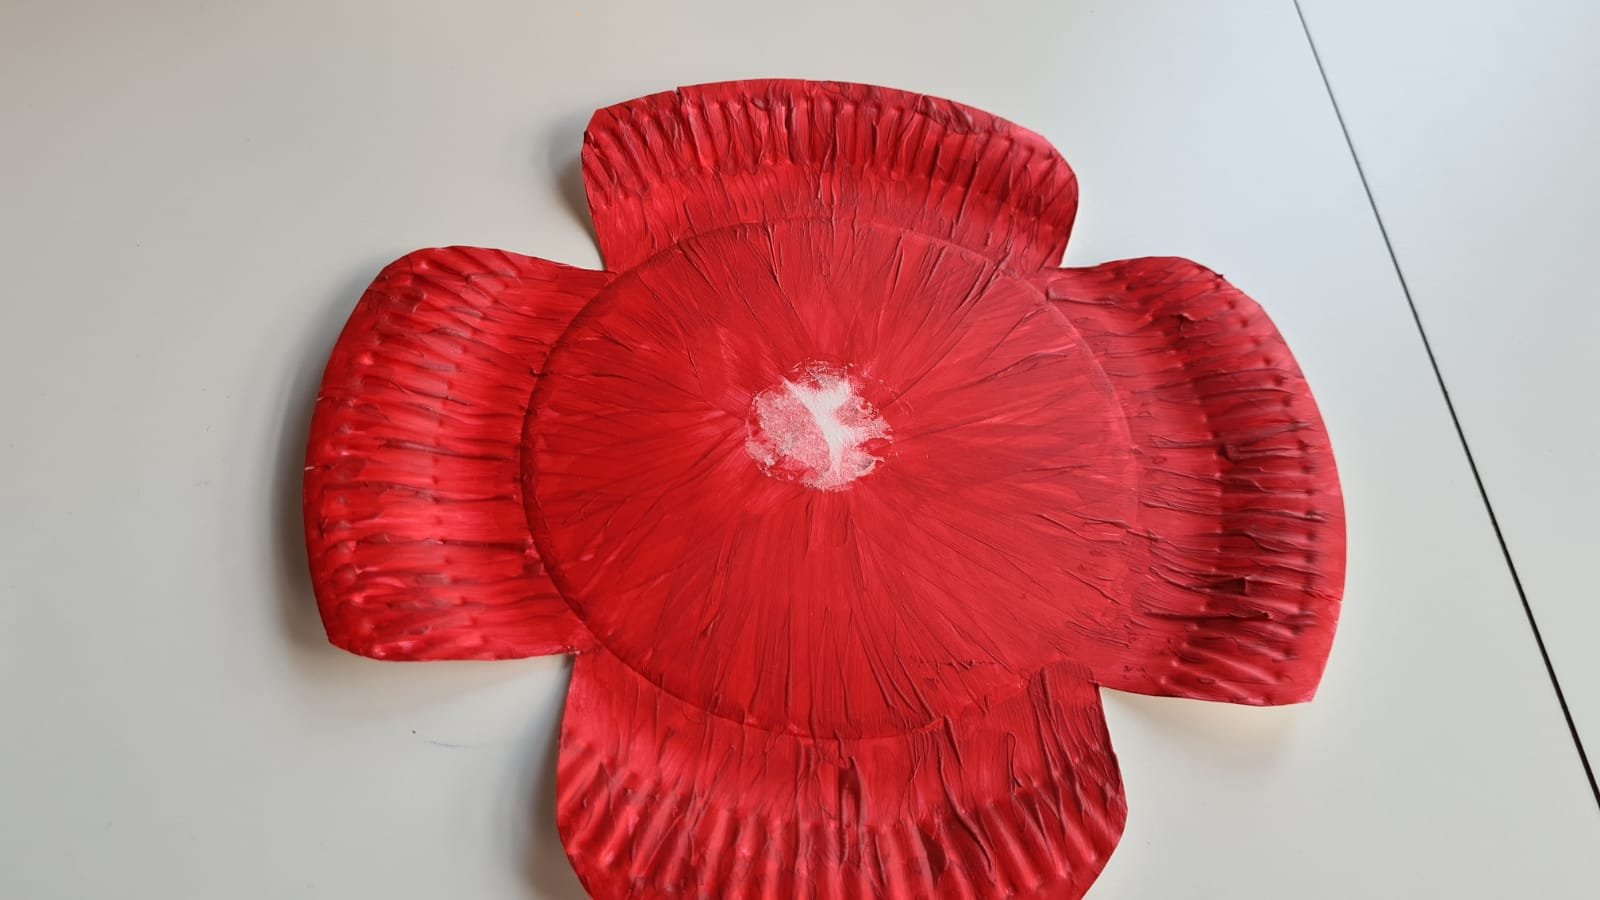 Paper plate cut into poppy shape and painted red